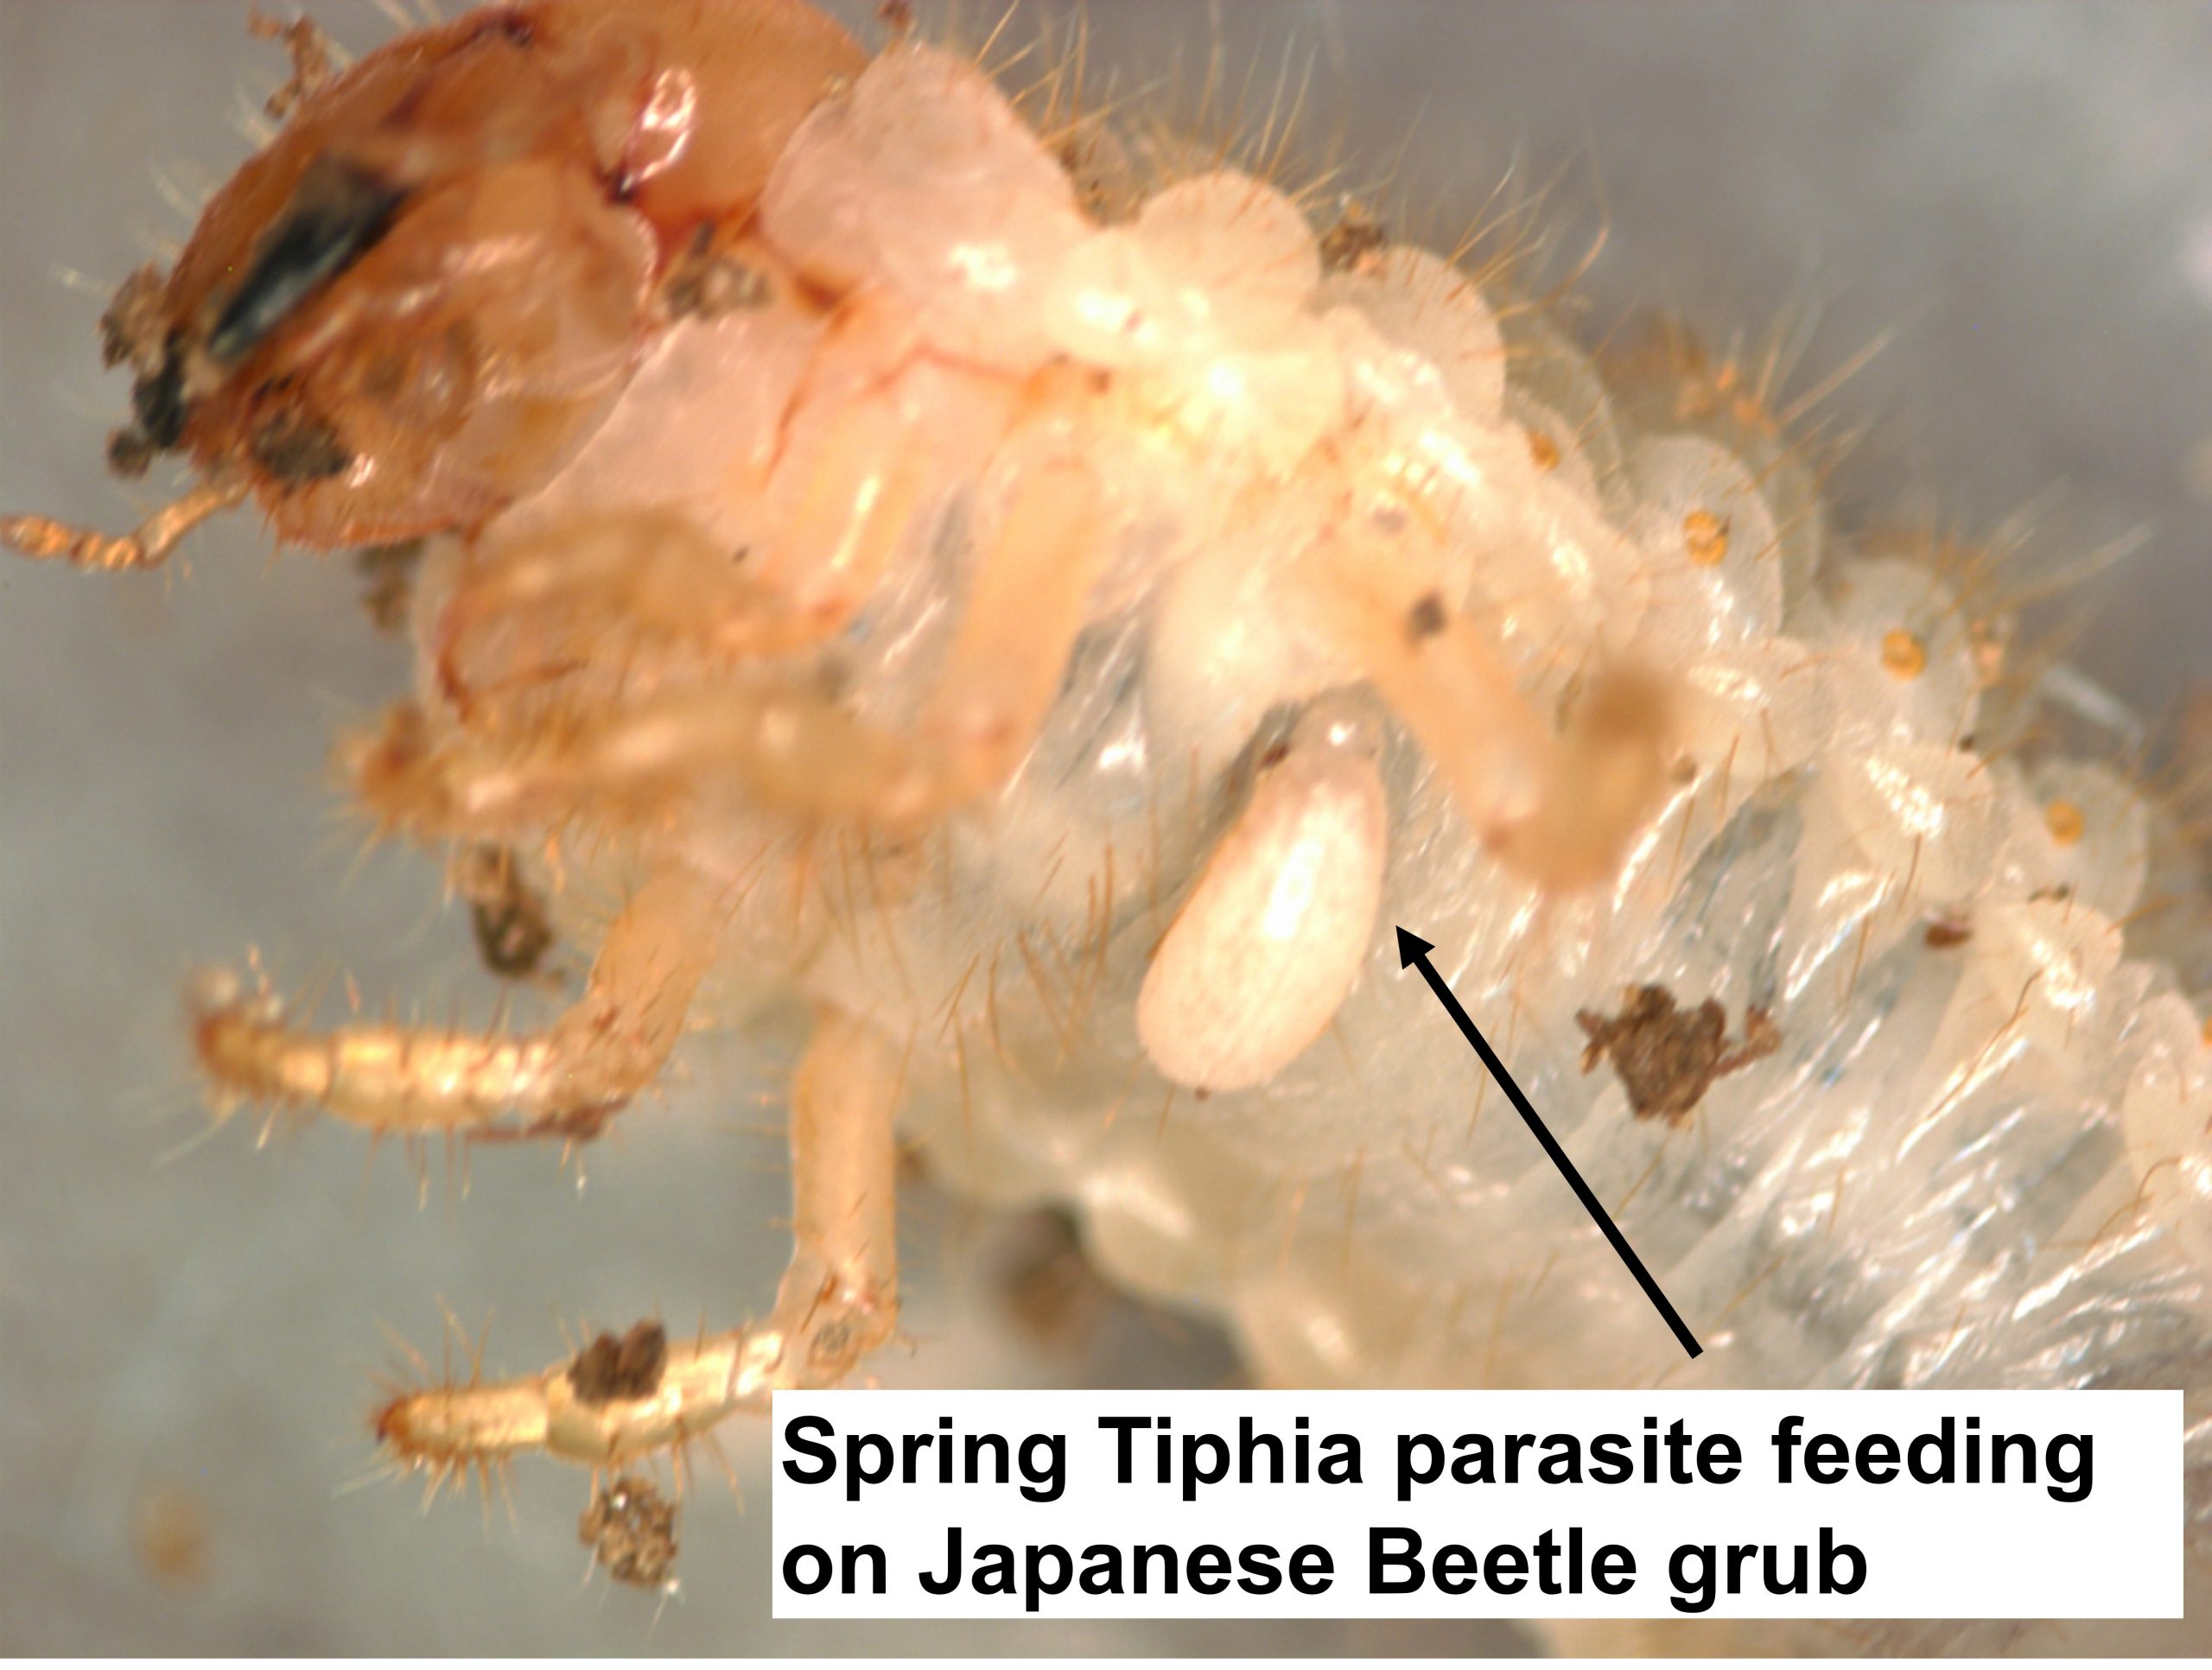 Early instar Spring Tiphia with label